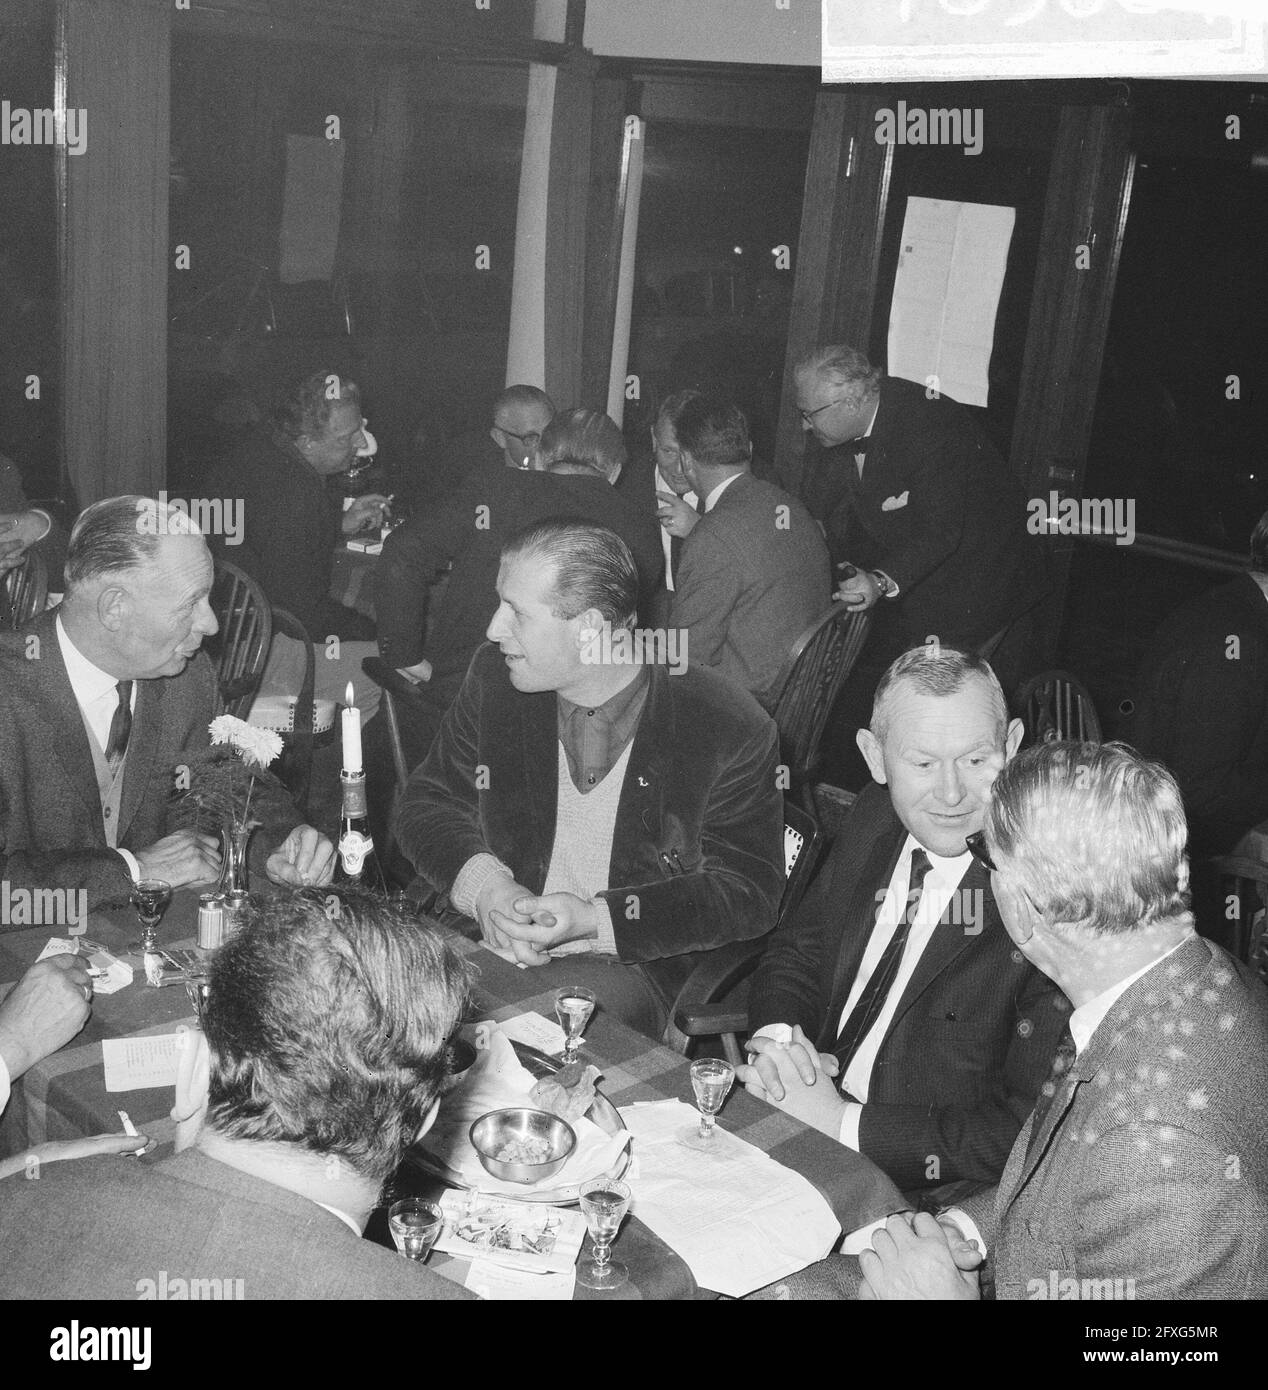 Association Club of the Hundred (fish); social gathering, December 16, 1965, alcoholic beverages, meetings, associations, The Netherlands, 20th century press agency photo, news to remember, documentary, historic photography 1945-1990, visual stories, human history of the Twentieth Century, capturing moments in time Stock Photo